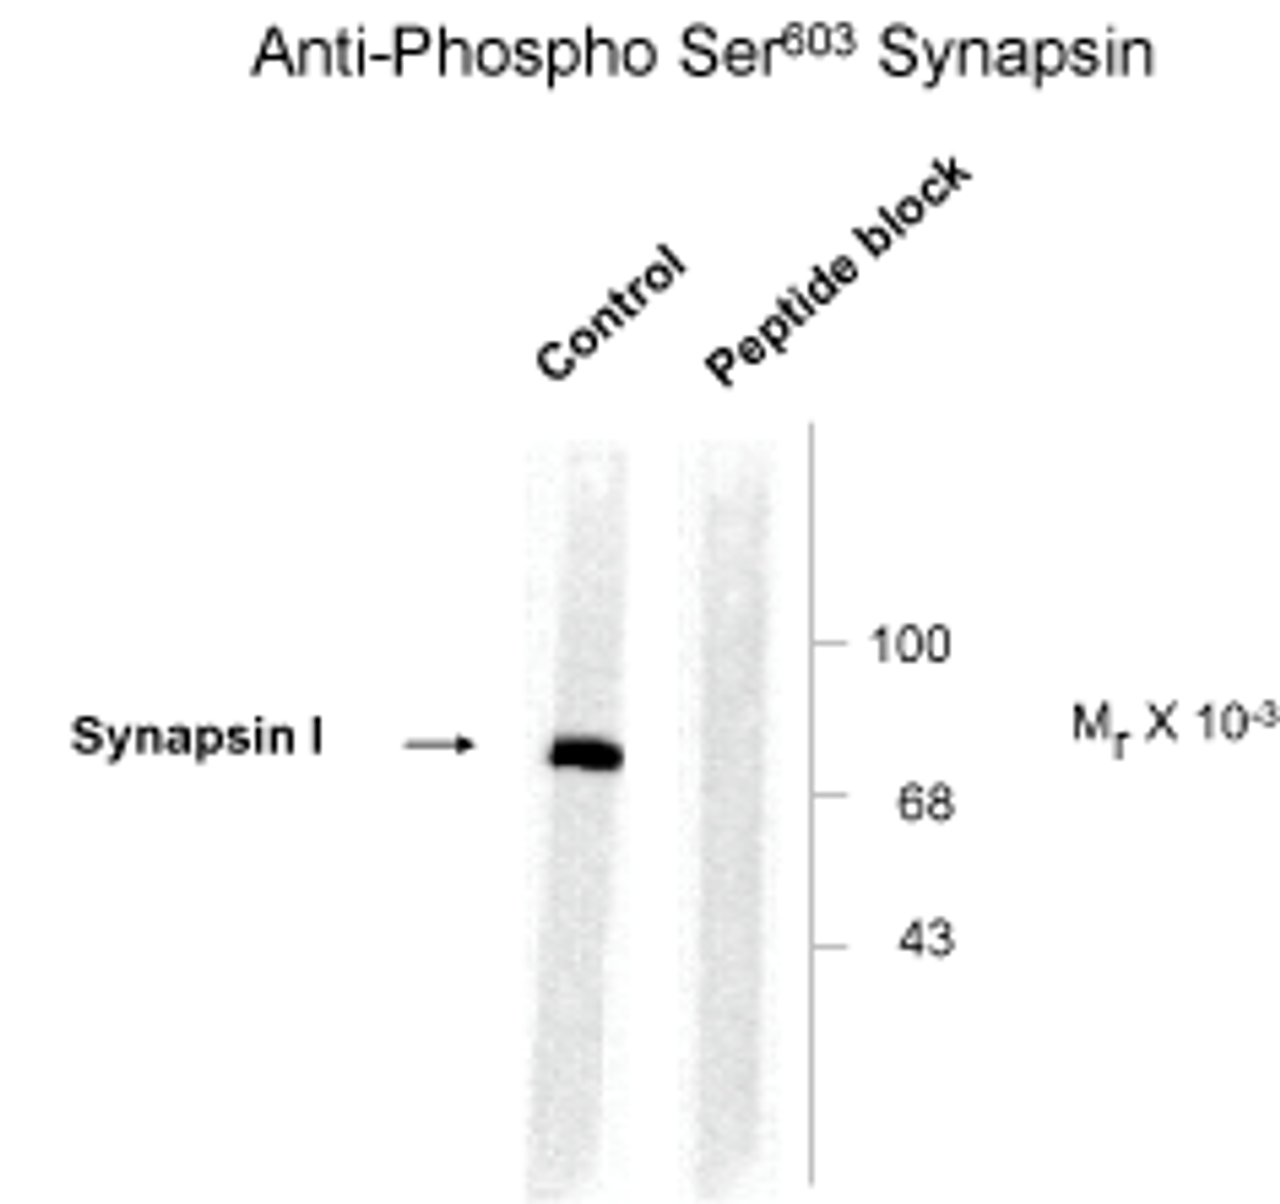 Western blot of rat cortex lysate showing phosphospecific immunolabeling of the ~78k synapsin I protein phosphorylated at Ser603.